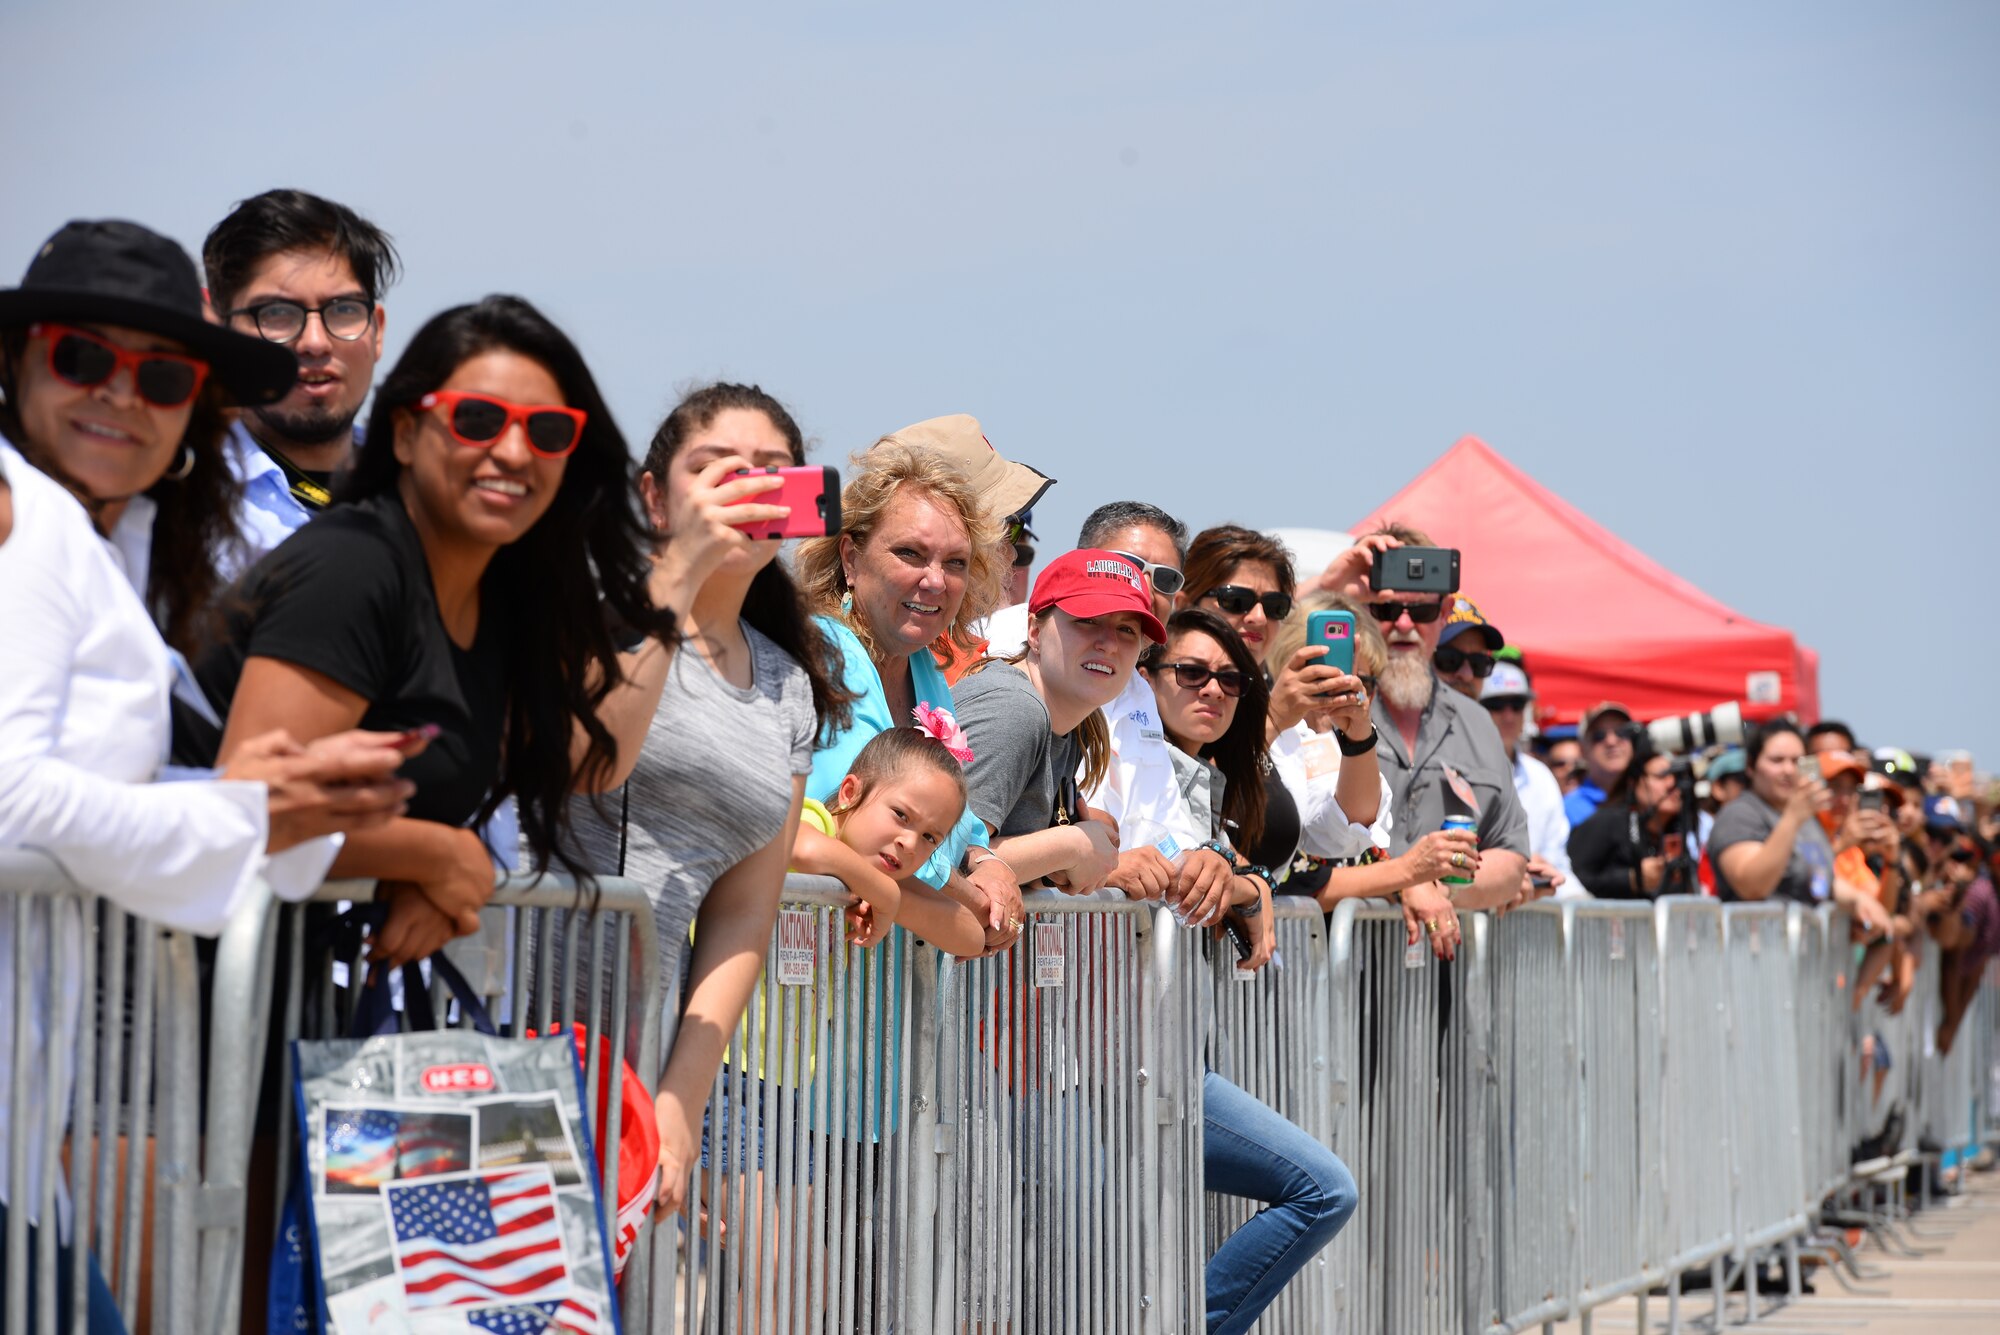 Attendees of Laughlin Air Force Base’s open house and airshow, “Fiesta of Flight,” watch as performers navigate the Texas skies, May 12, 2018. With more than 20,000 people in attendance, aircraft from various generations displayed their aerial capabilities. (U.S. Air Force photo by Senior Airman Benjamin N. Valmoja)